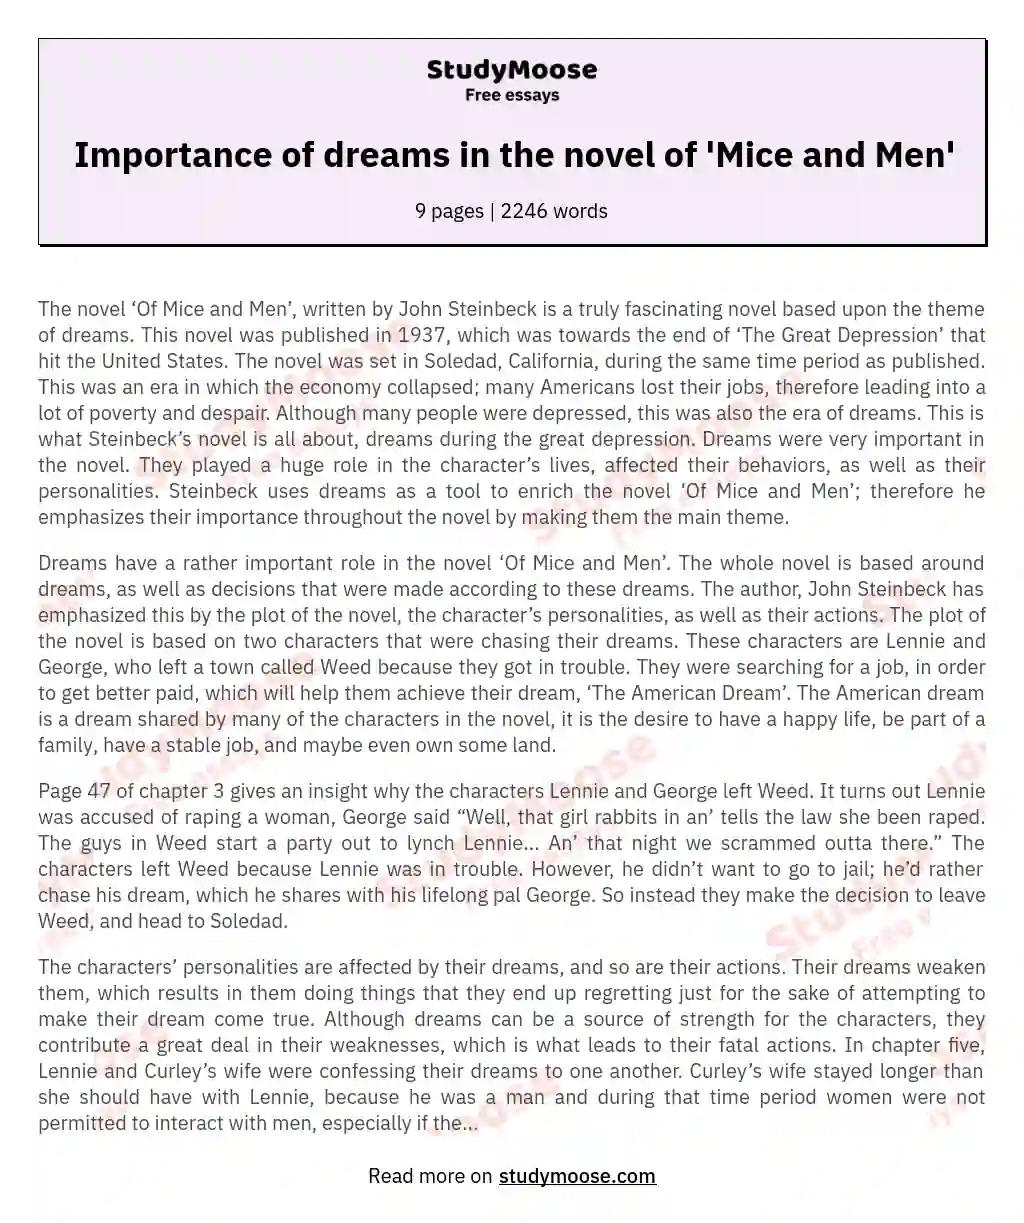 Importance of dreams in the novel of 'Mice and Men' essay